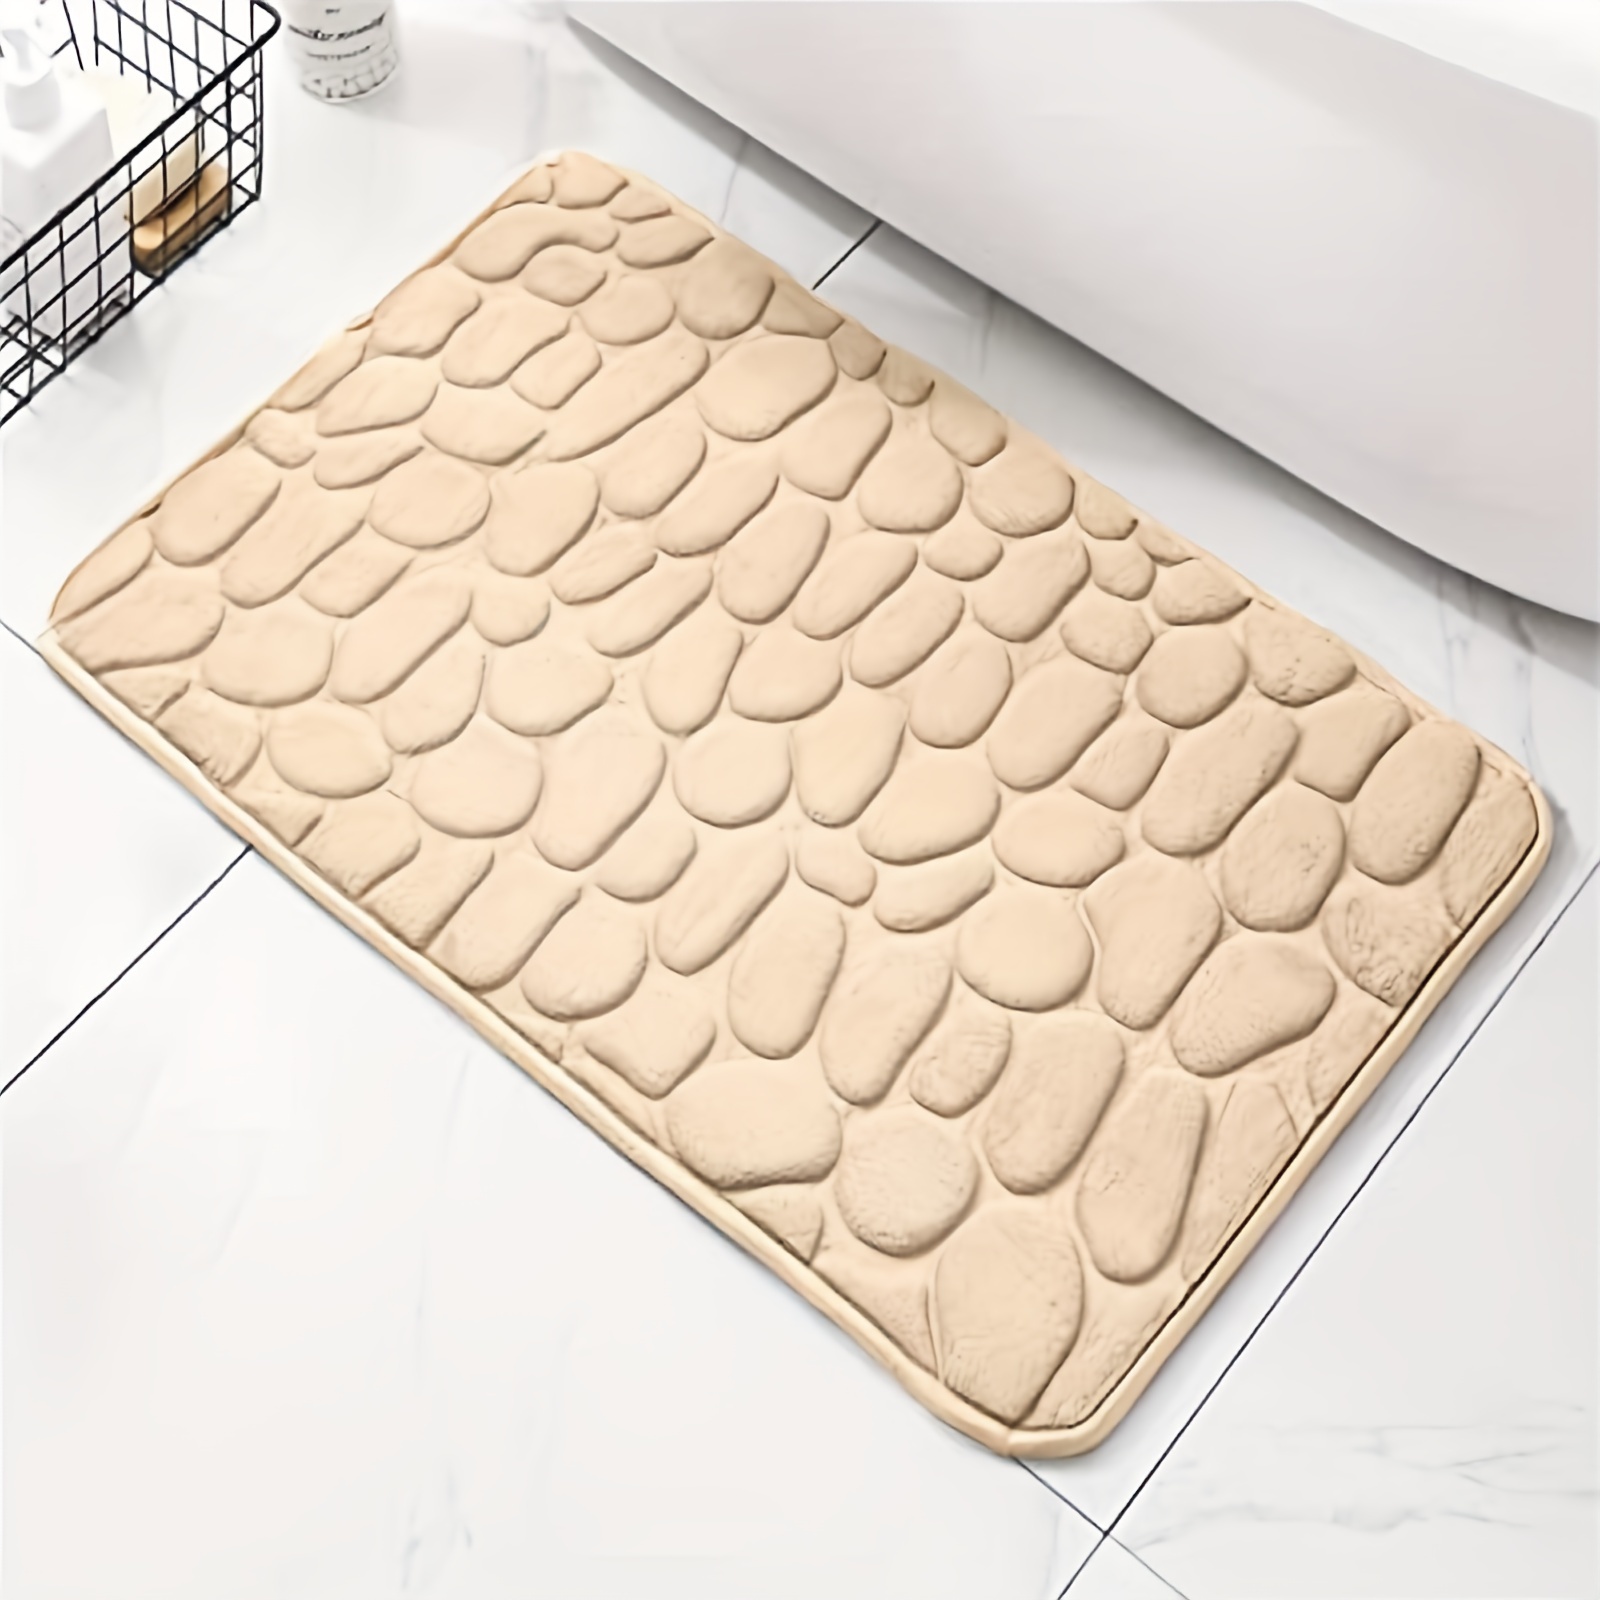 3D Cobble Taupe 20 in. x 32 in. Stone Shaped Memory Foam